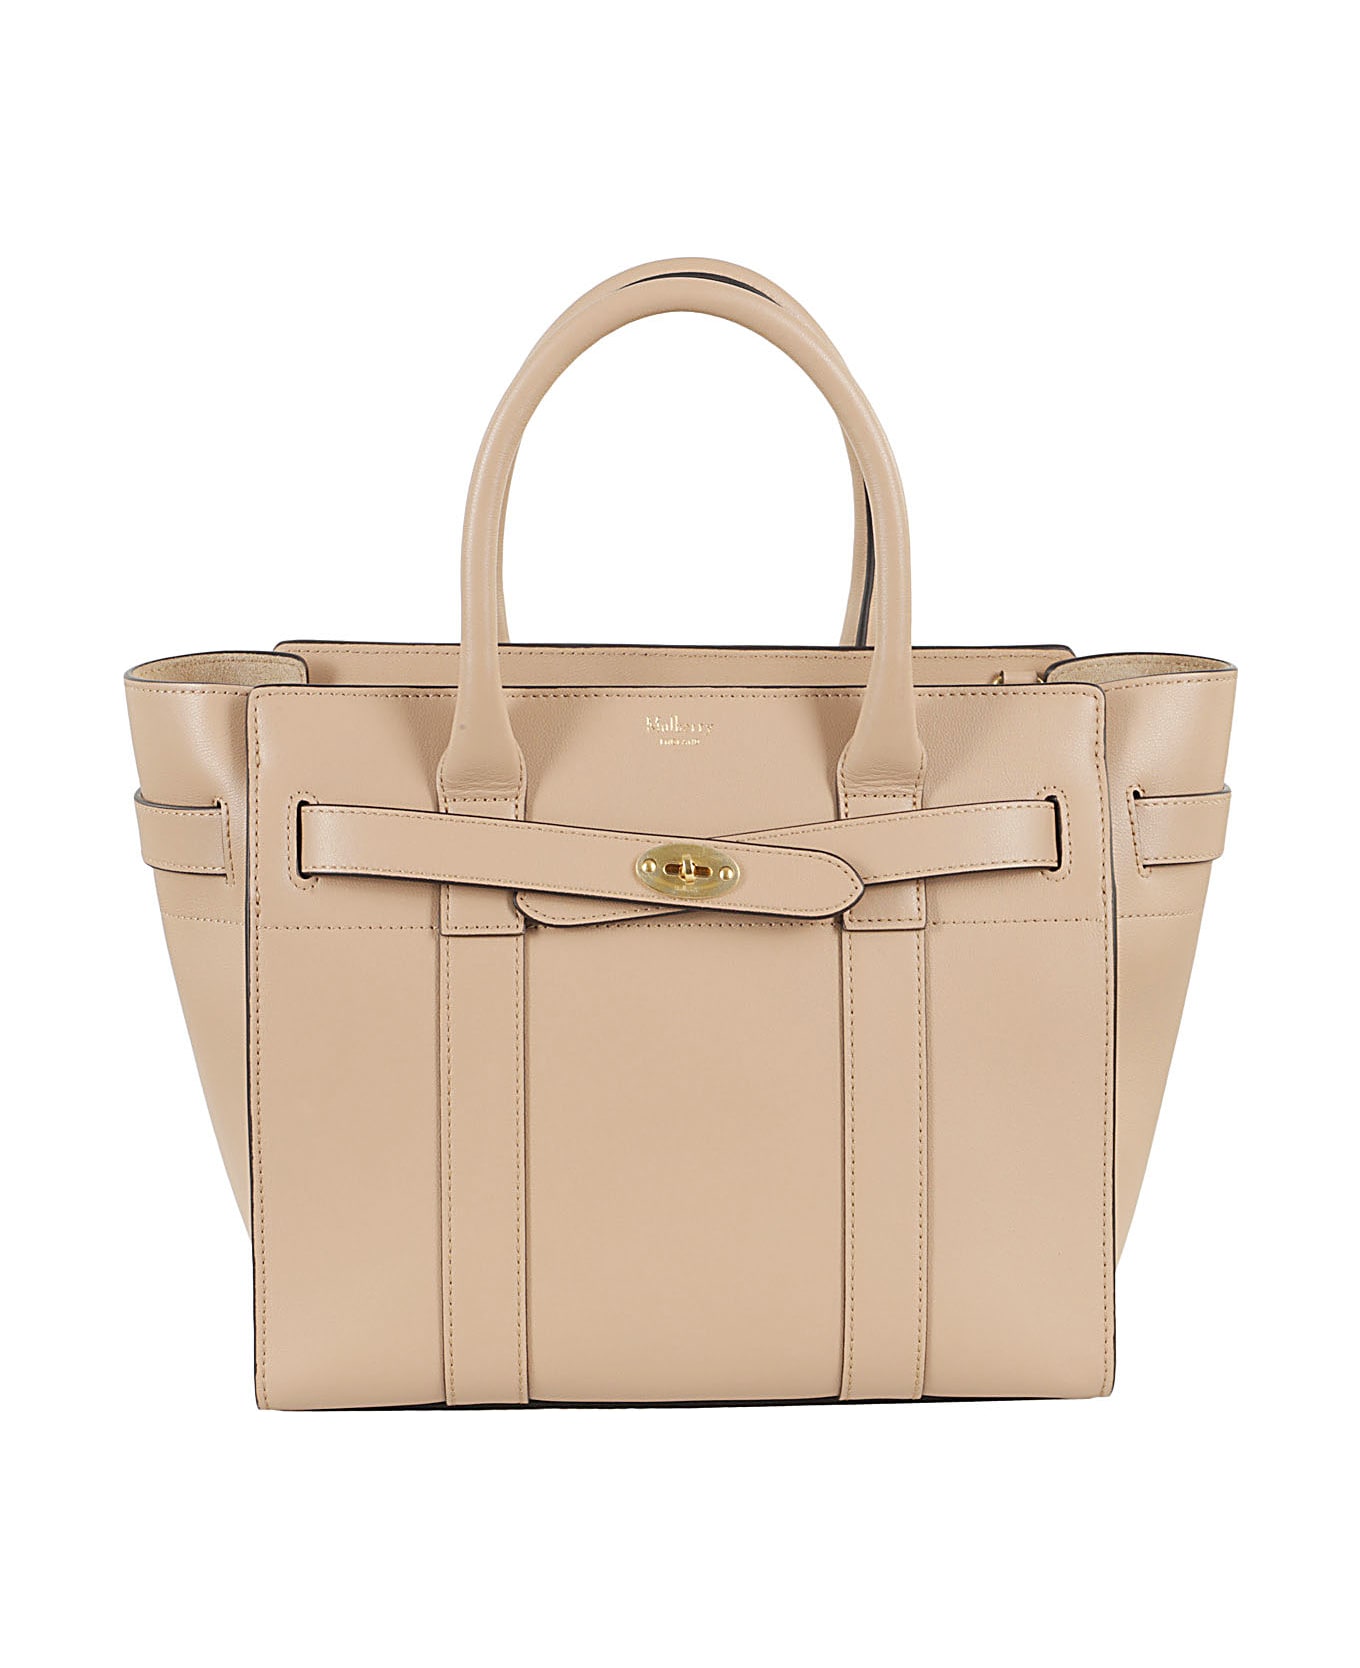 Mulberry Small Zipped Bayswater - Maple